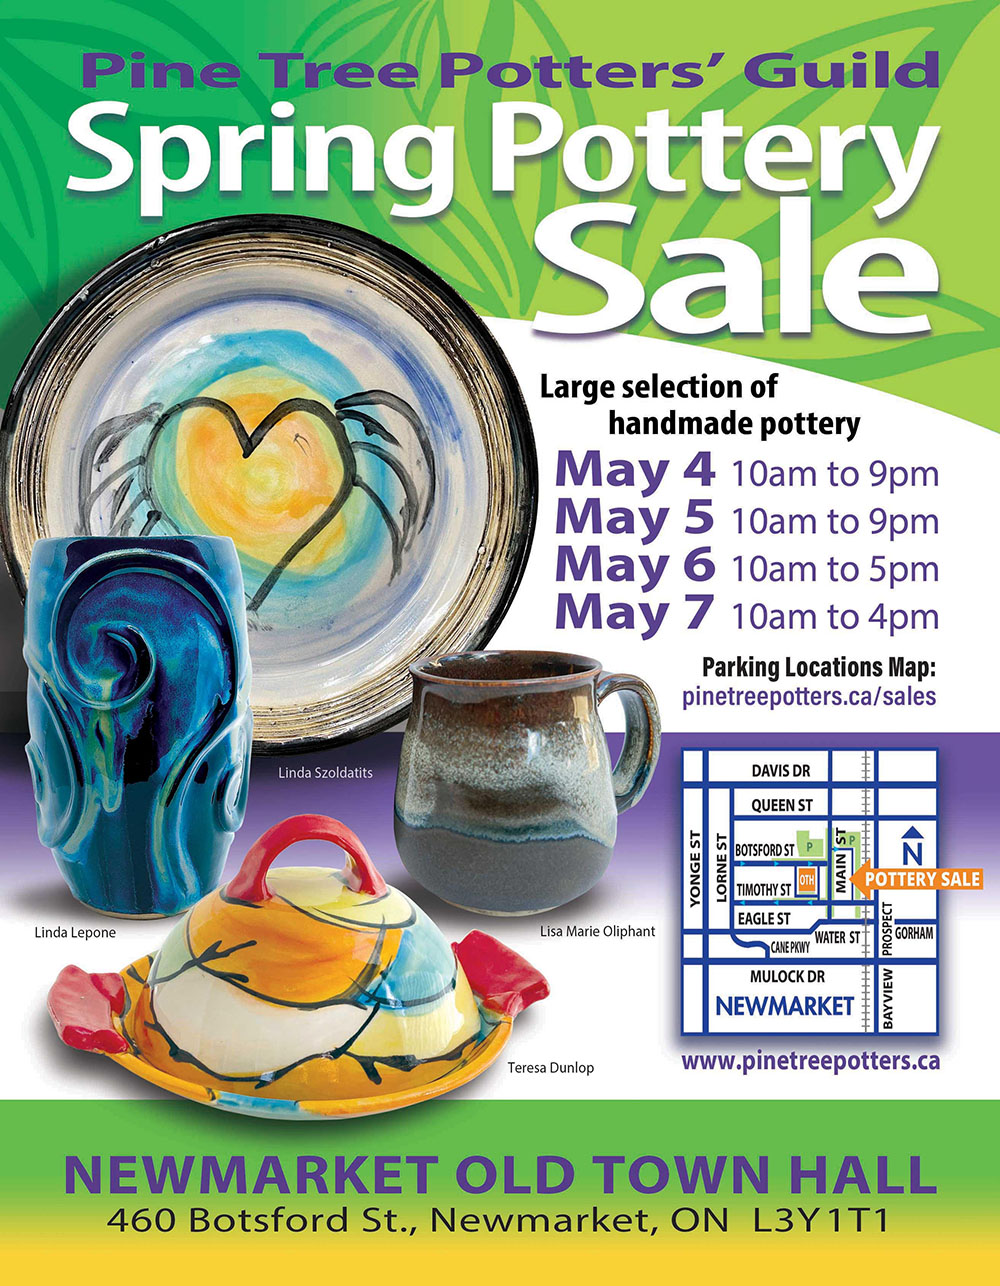 Spring Pottery Show and Sale, May 4 to 7, at Newmarket Old Town Hall